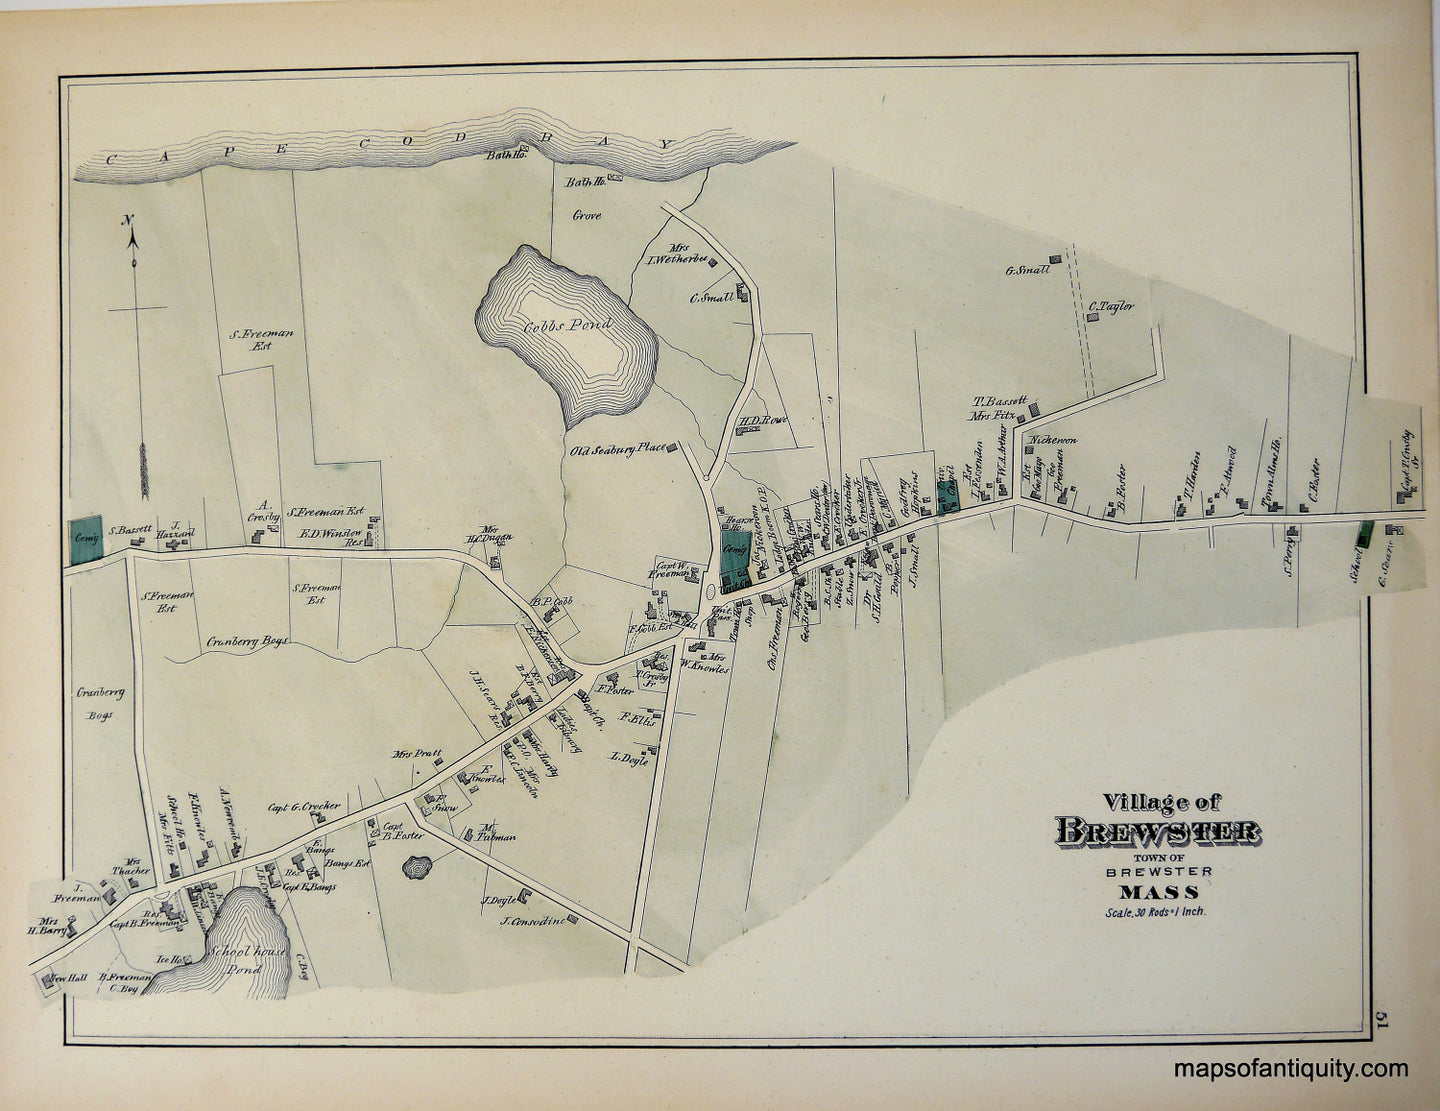 Reproduction-Village-of-Brewster-p.-51-Town-and-Village-Maps-Atlas-of-Barnstable-County-Walker-1880.---Reproduction---Reproductions-Cape-Cod-and-Islands-Reproduction--Maps-Of-Antiquity